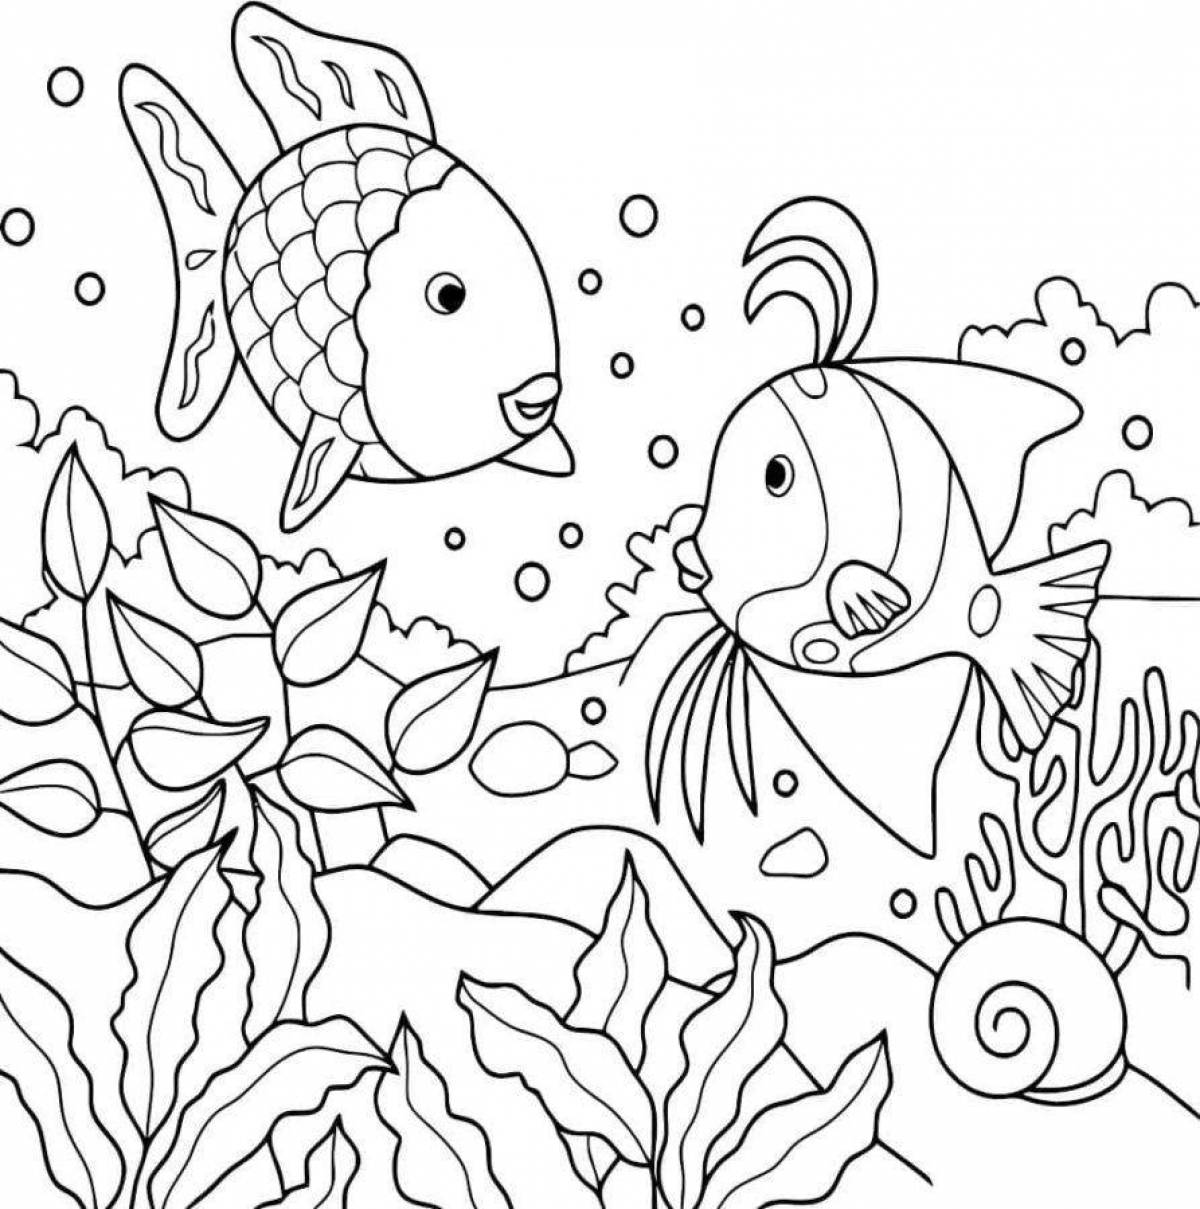 Fabulous sea life coloring book for children 5-6 years old